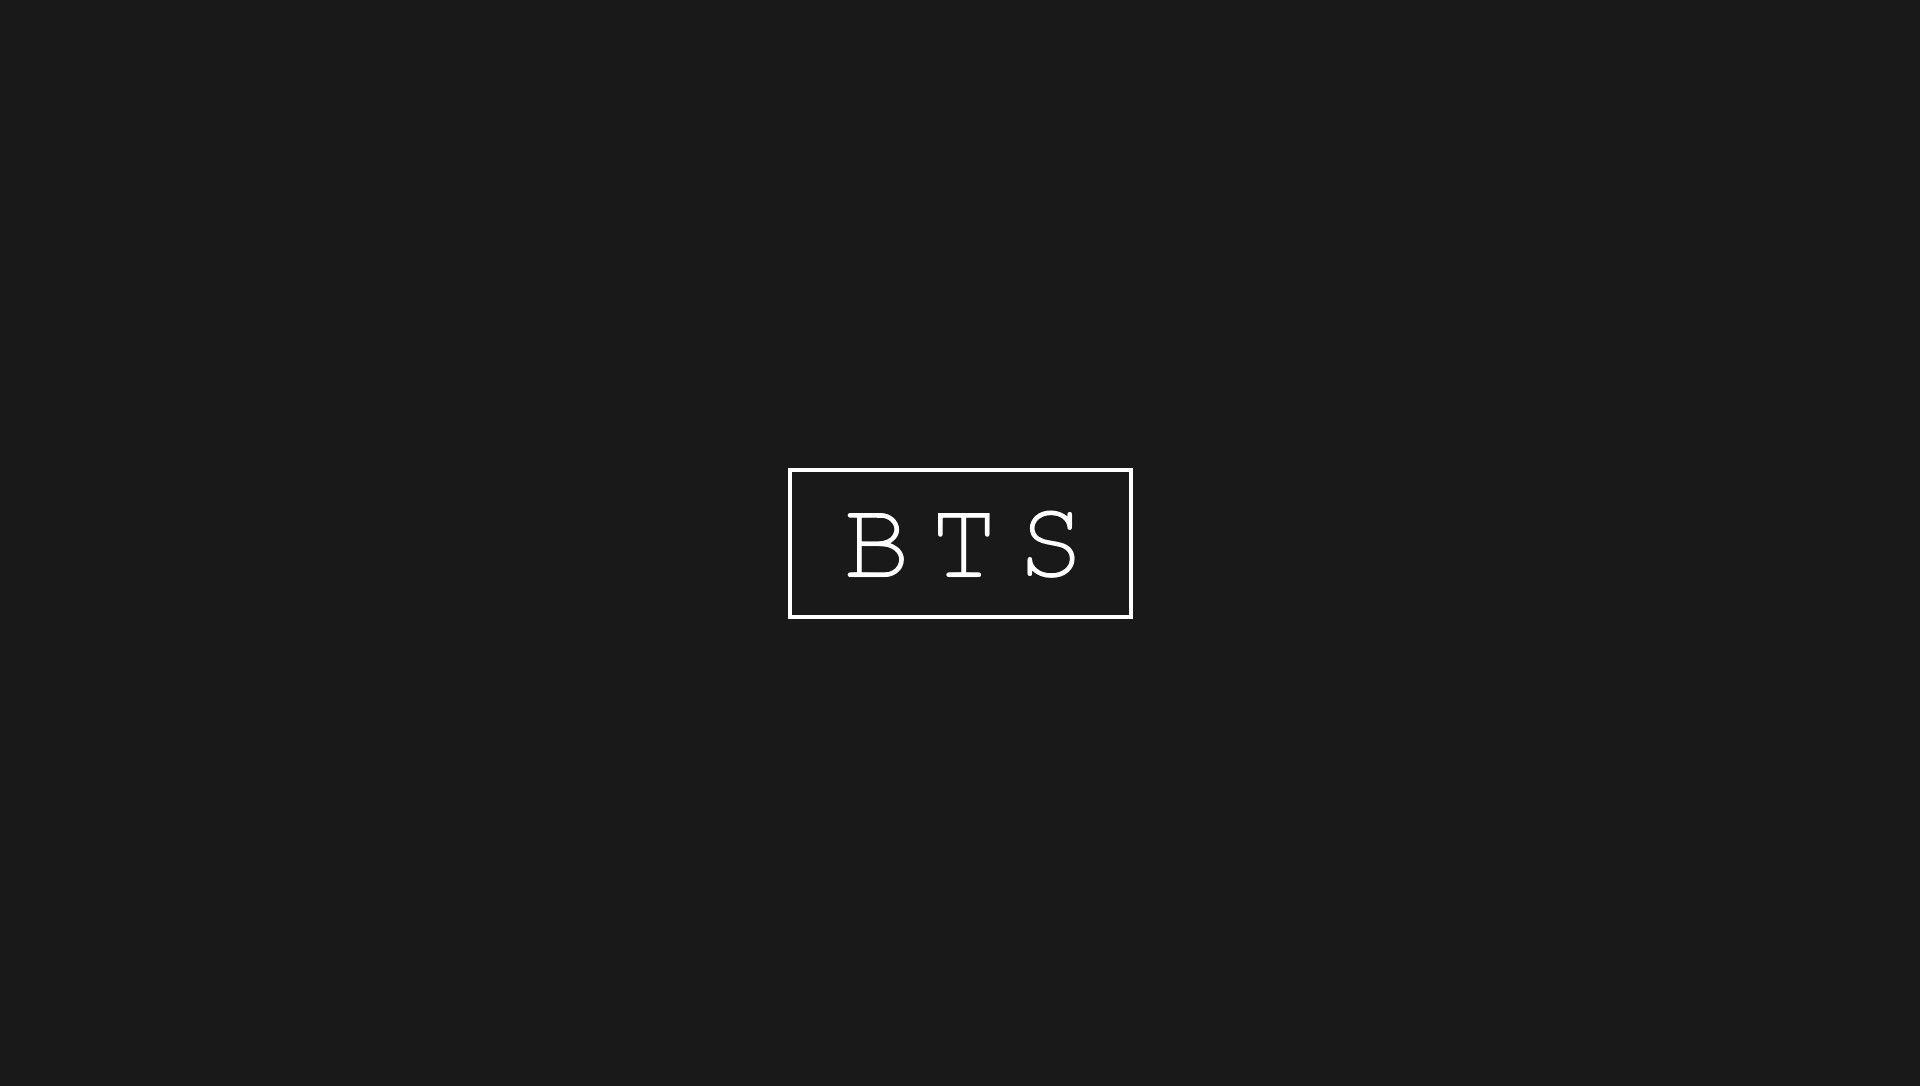 BTS Aesthetic Wallpapers - Wallpaper Cave